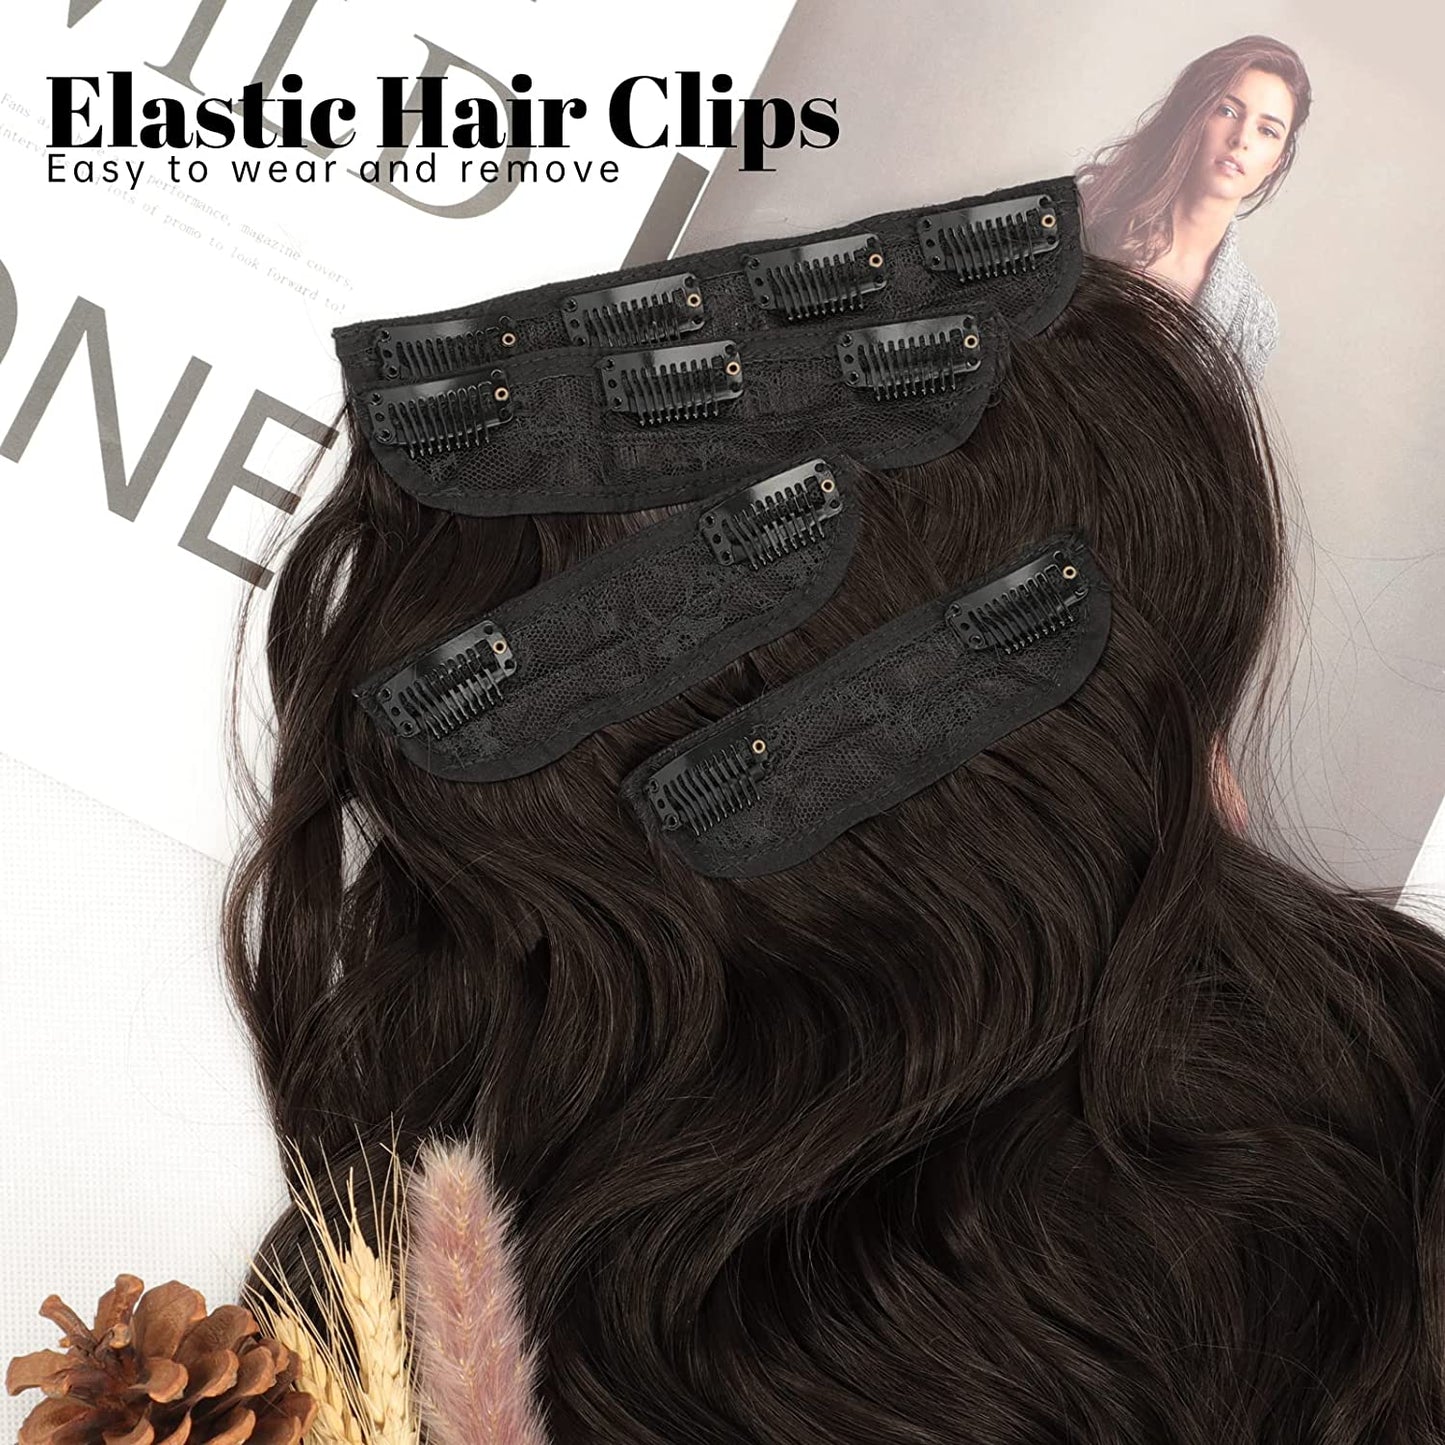 Lush Locks Human Hair Extensions clip in for Women